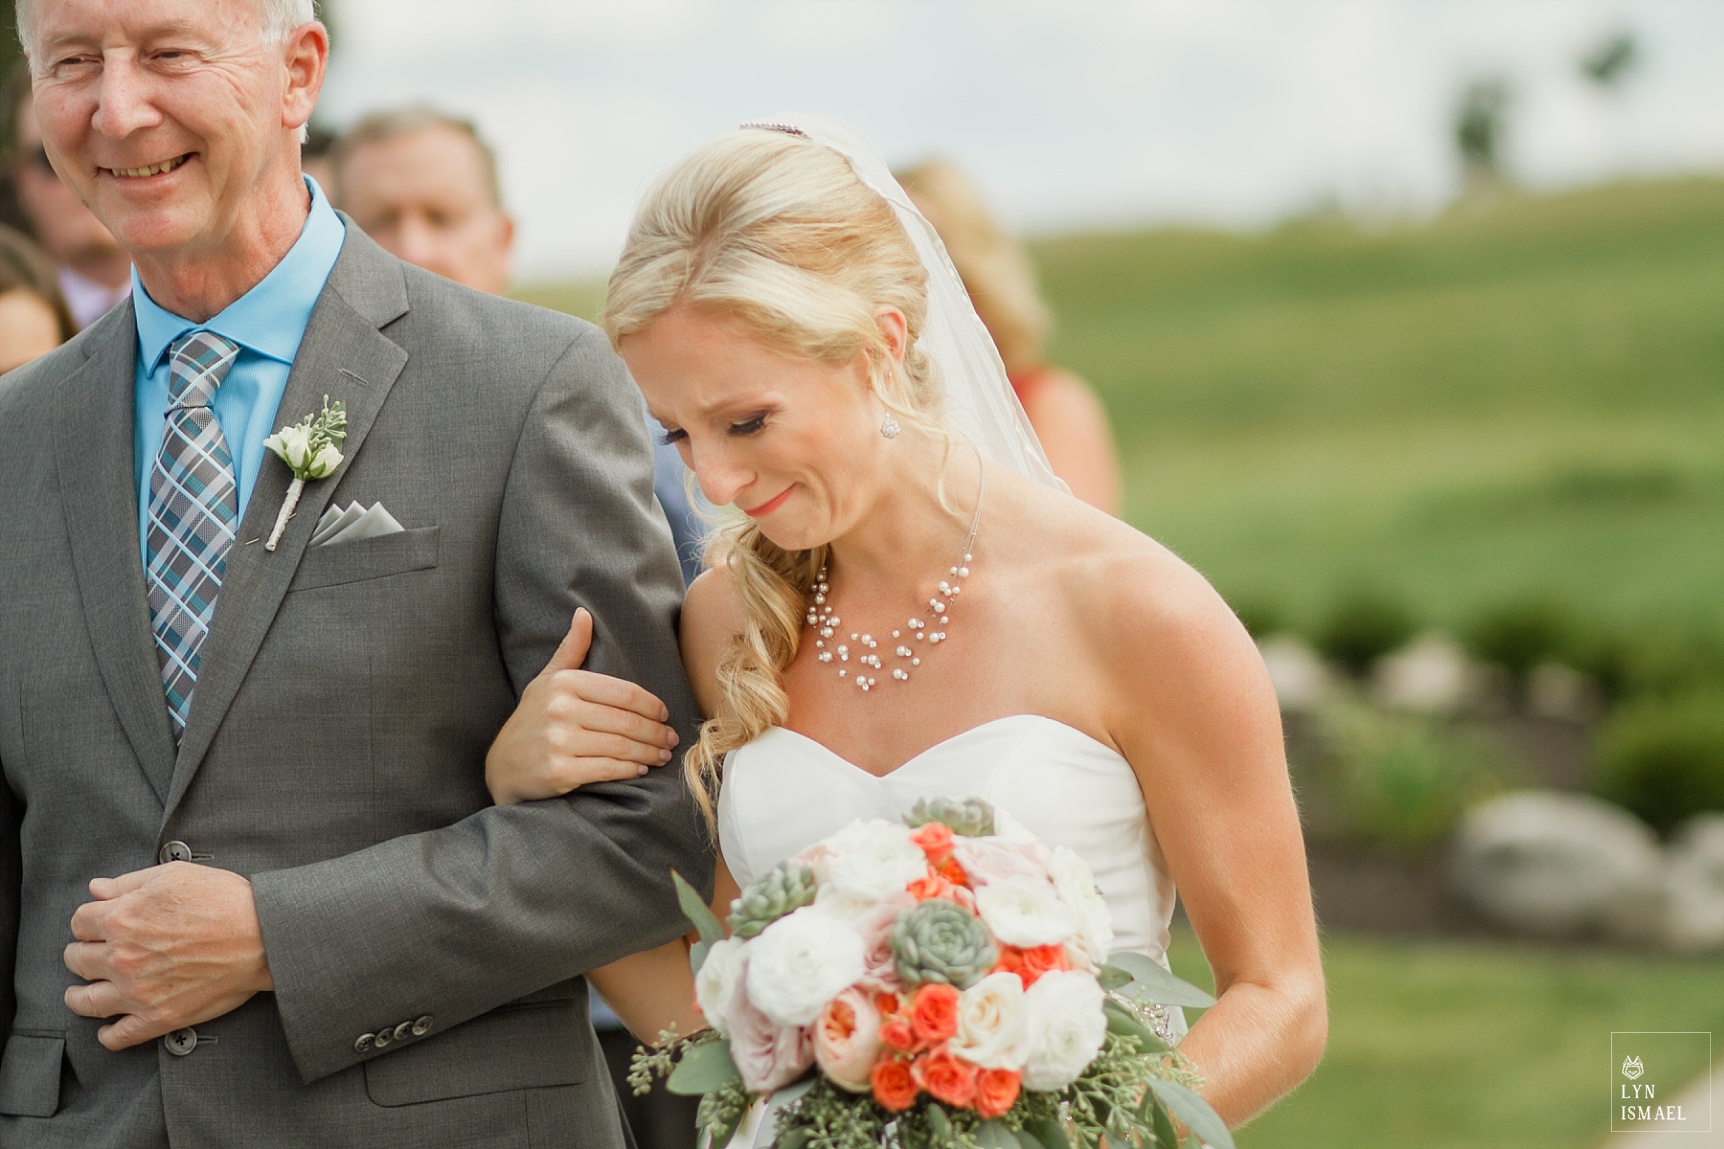 Bride becomes emotional walking down the aisle